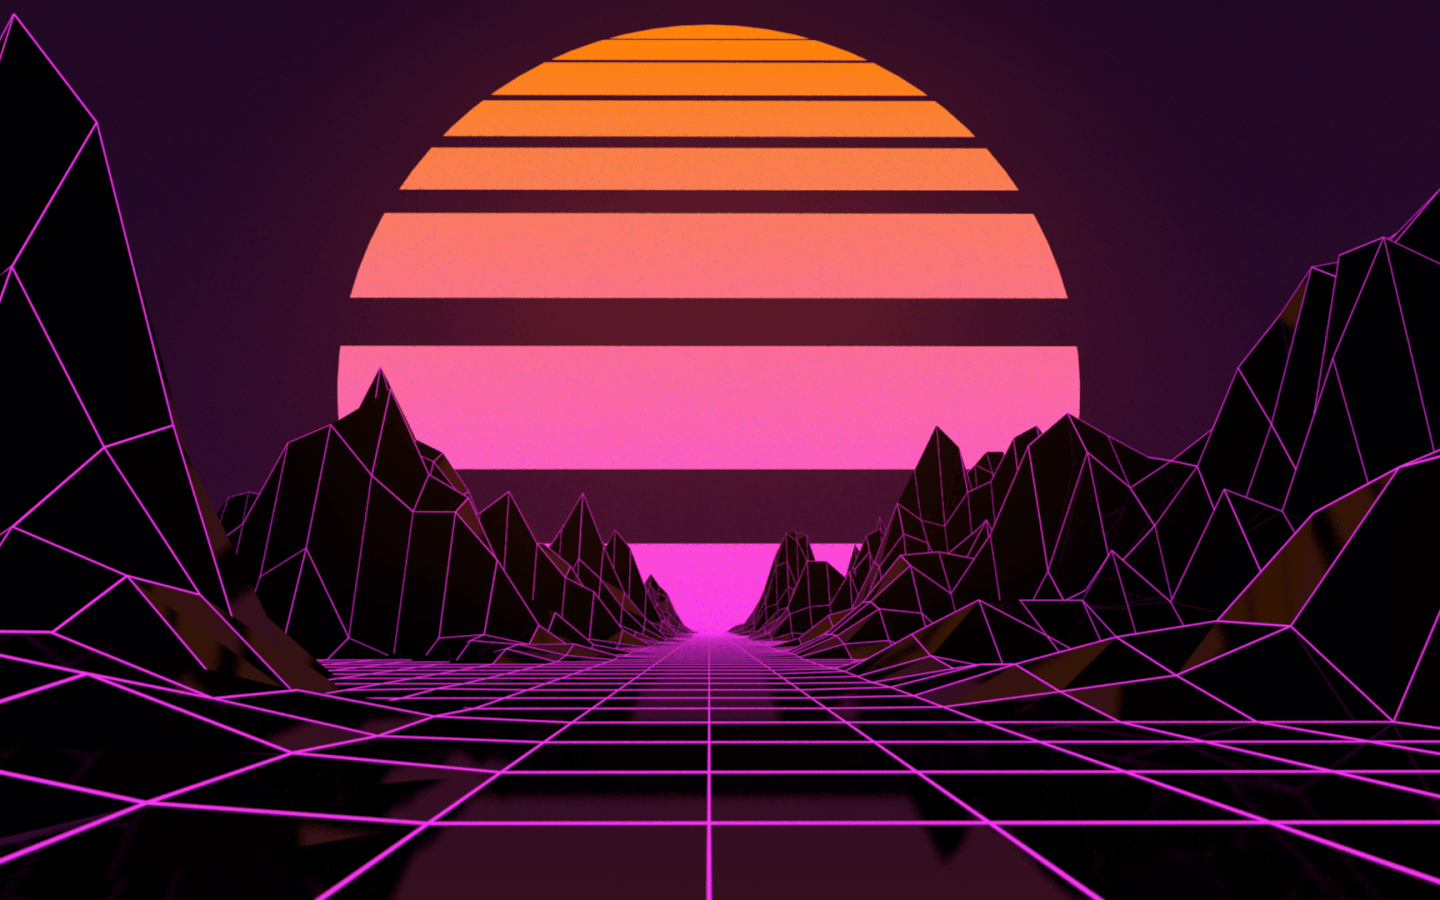 Outrun Wallpaper, image collections of wallpaper